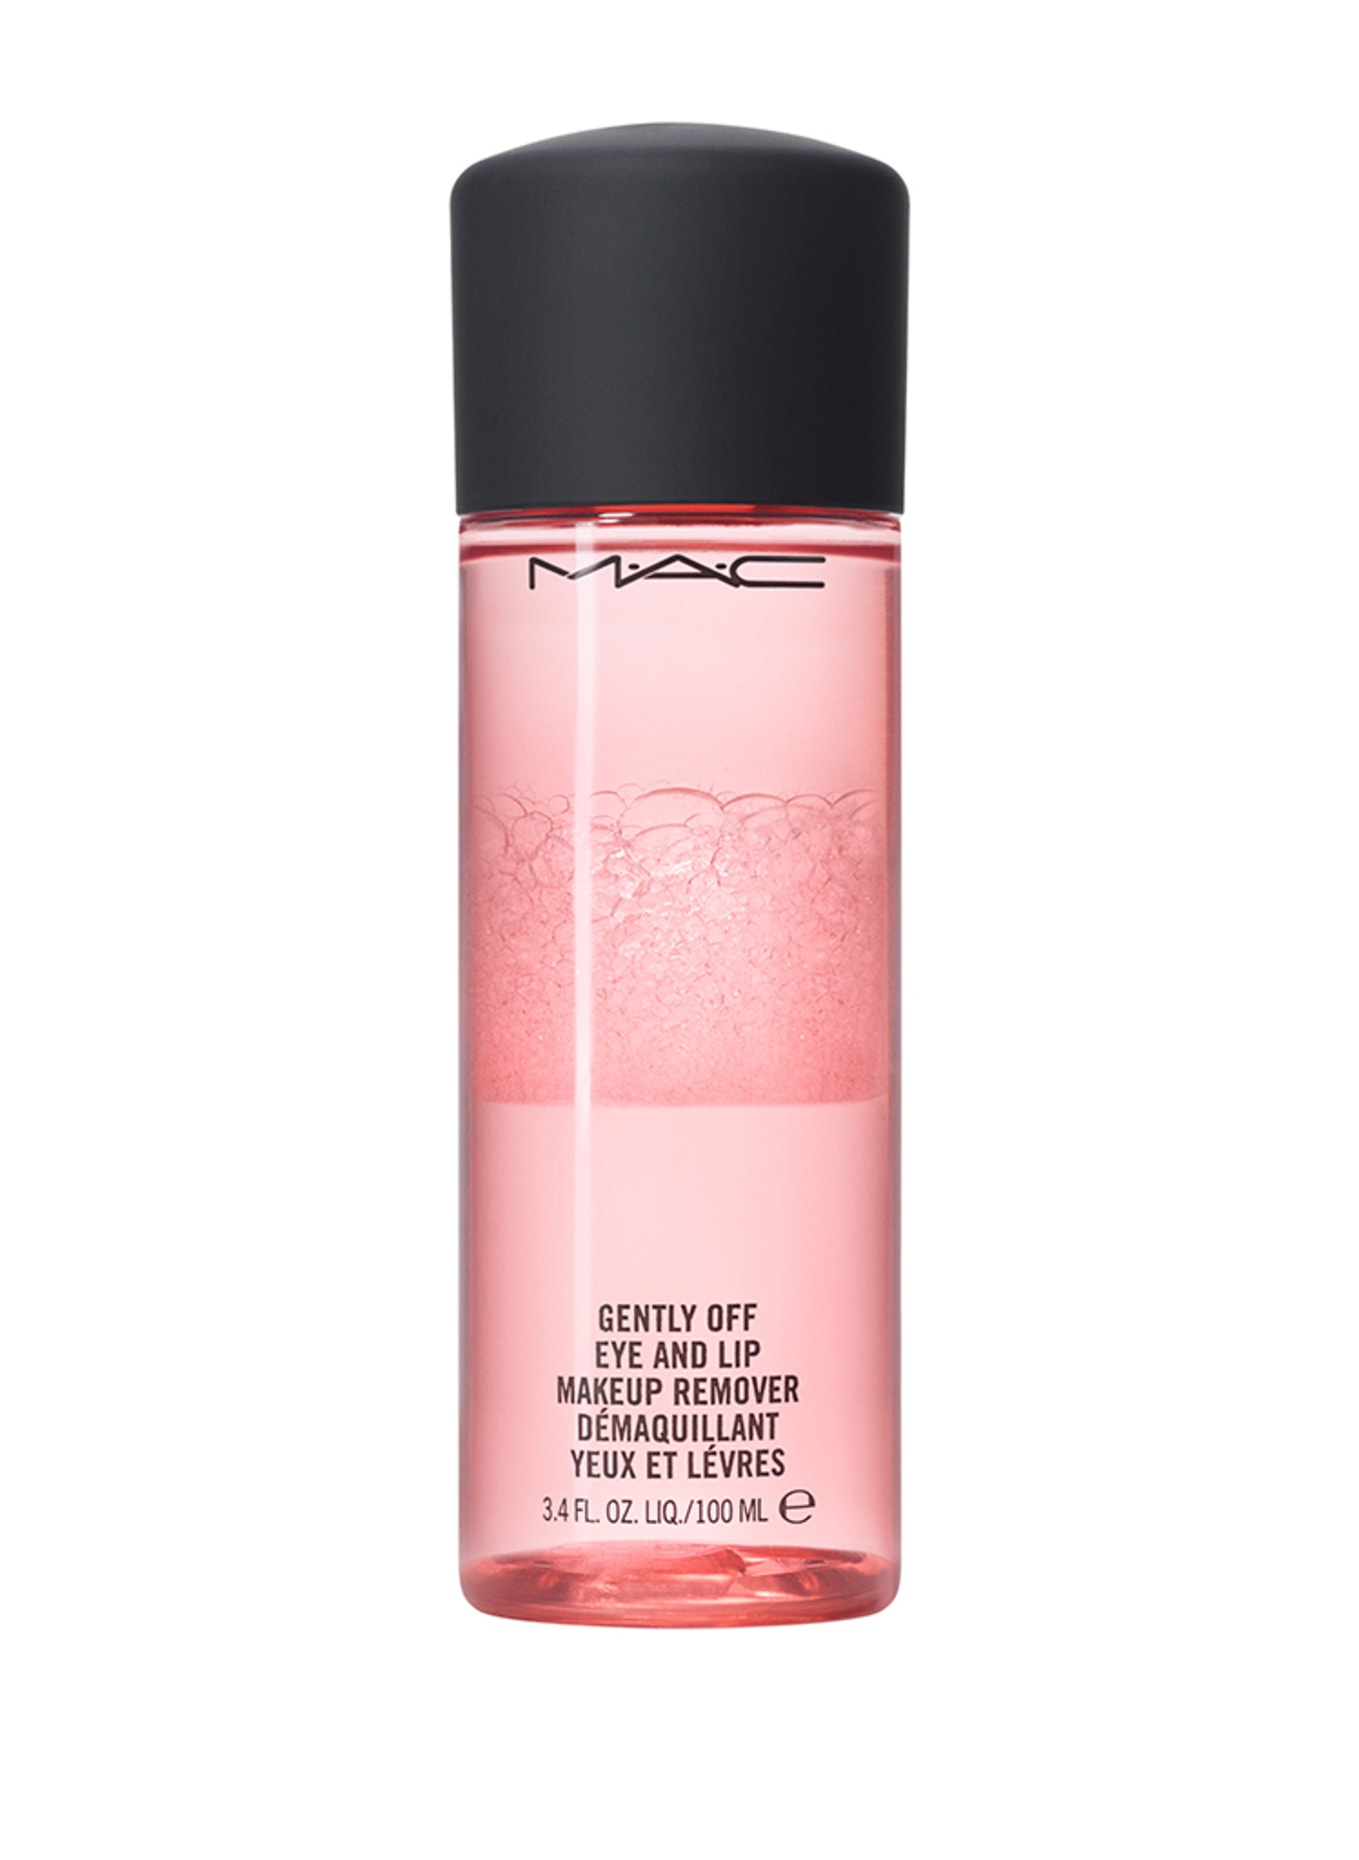 M.A.C GENTLY OFF EYE AND LIP MAKEUP REMOVER  (Obrazek 1)